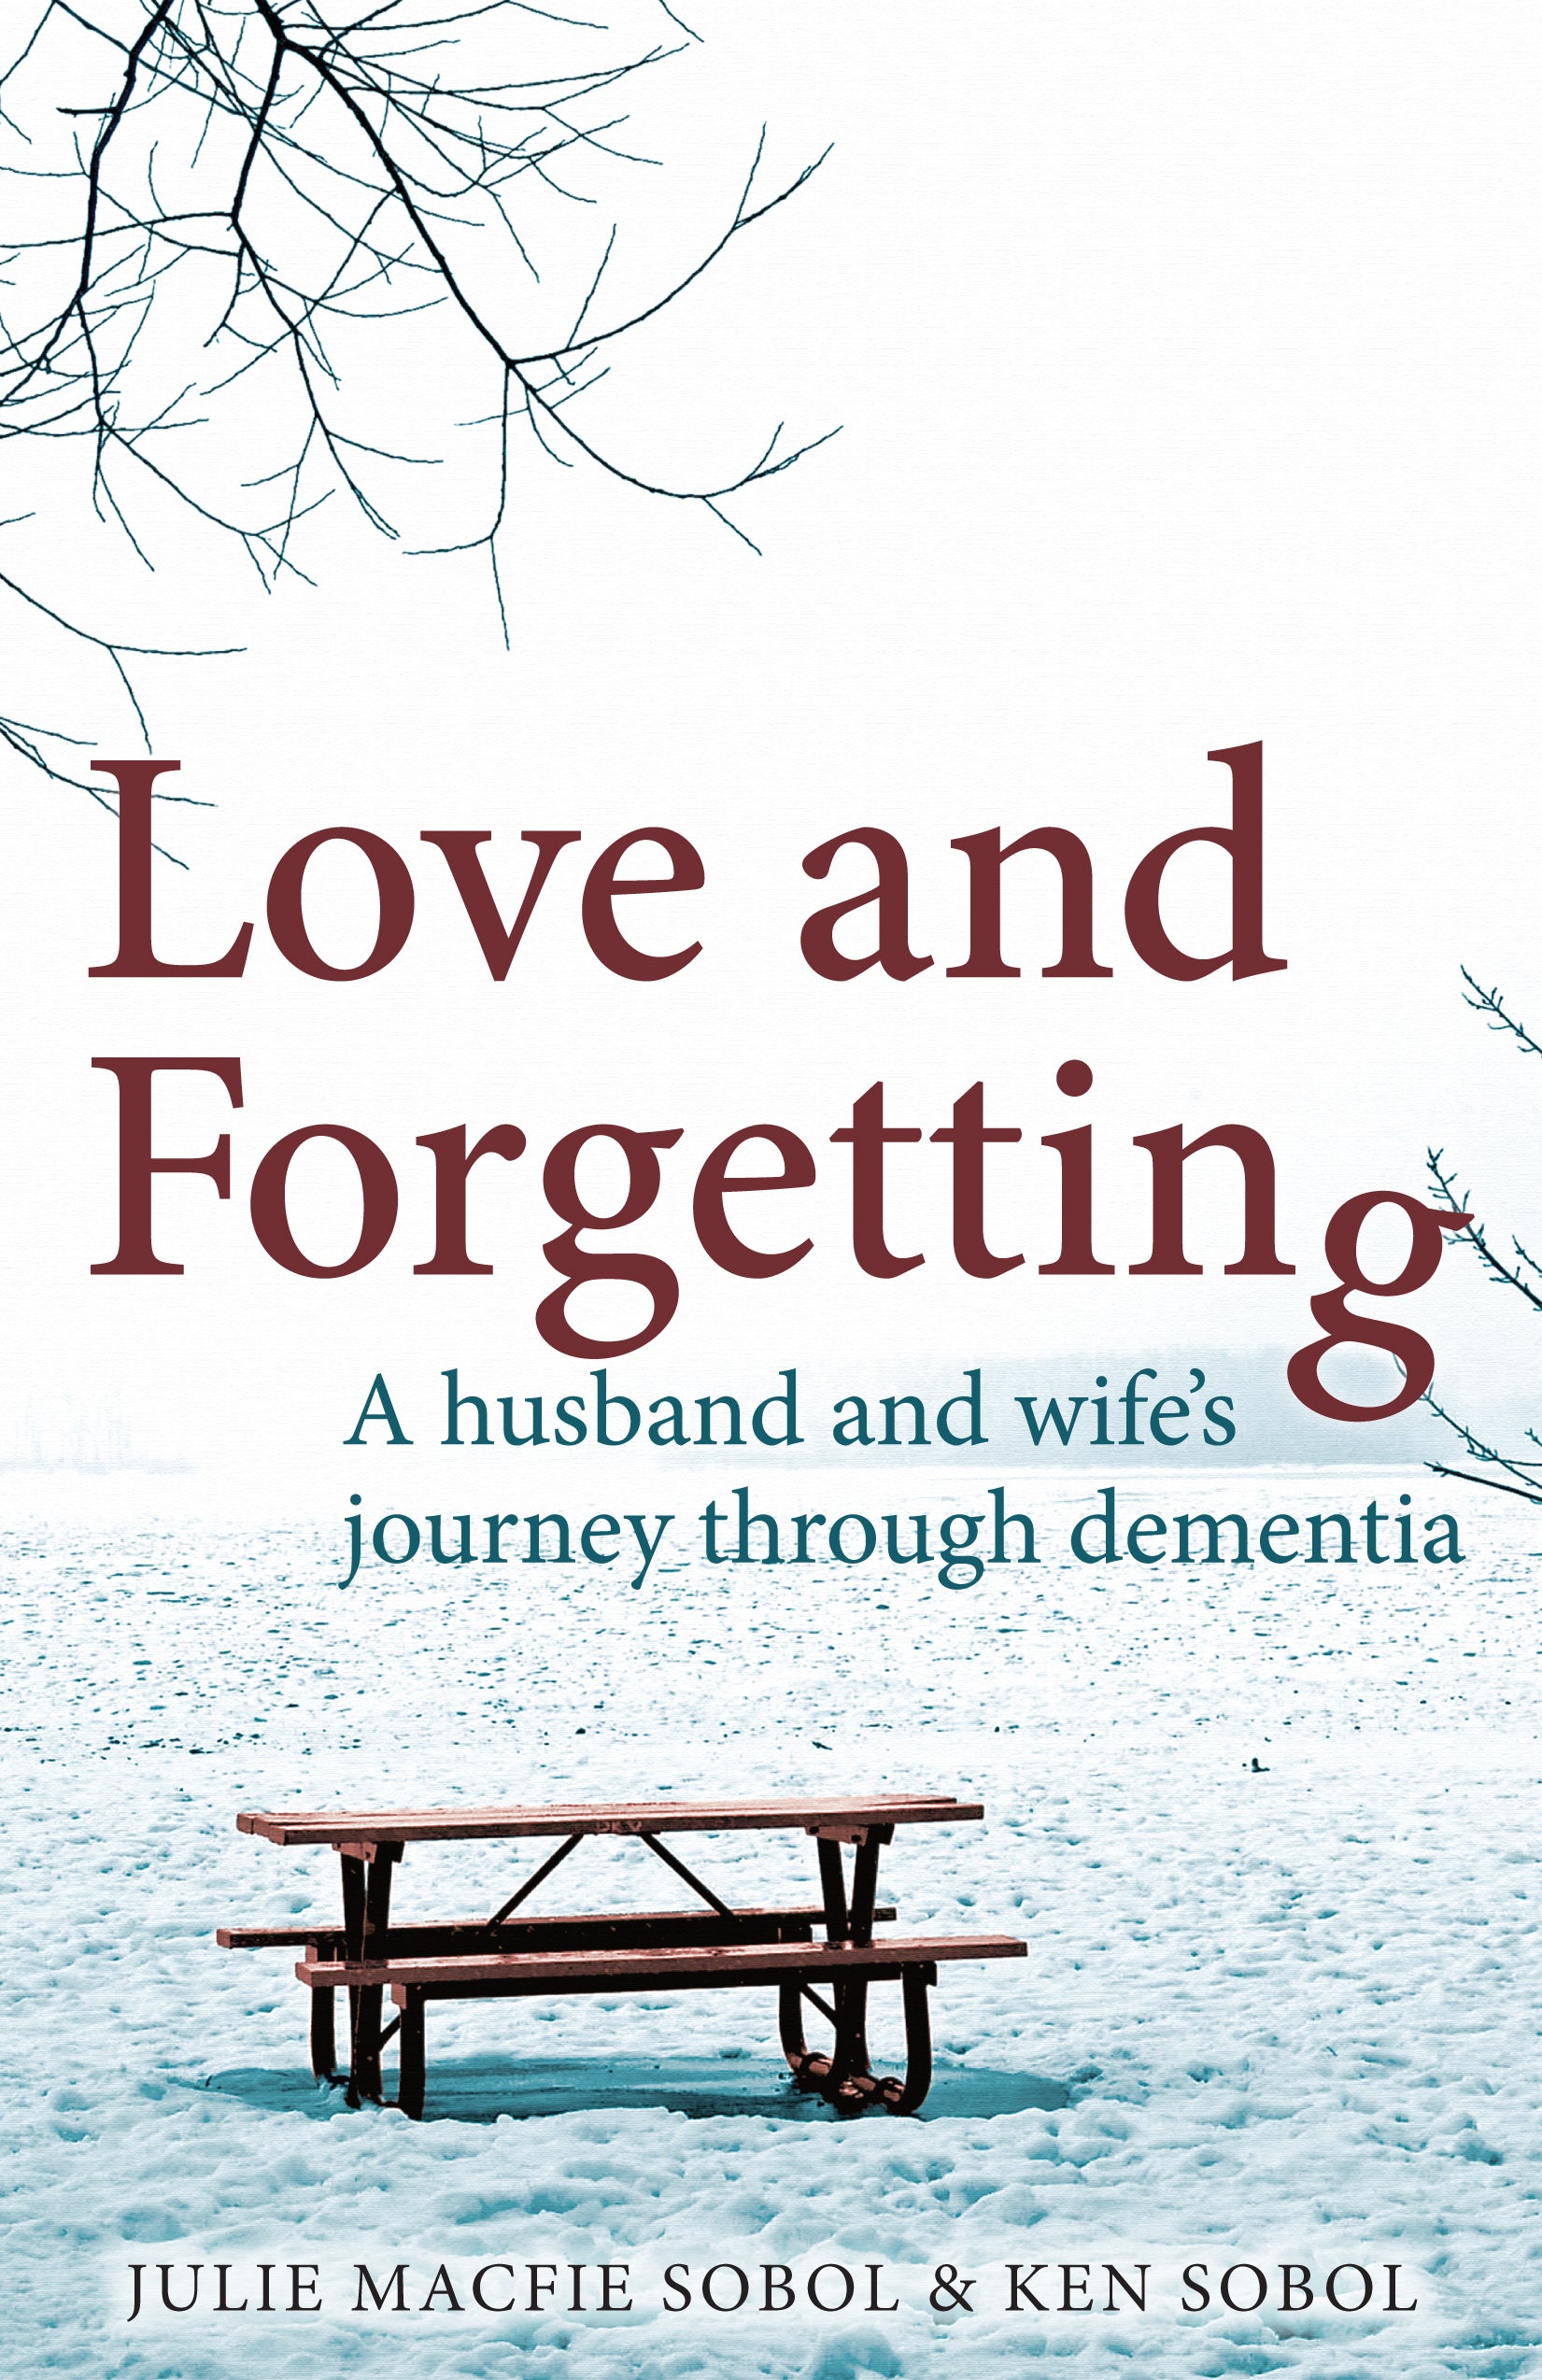 Love and Forgetting-ebook